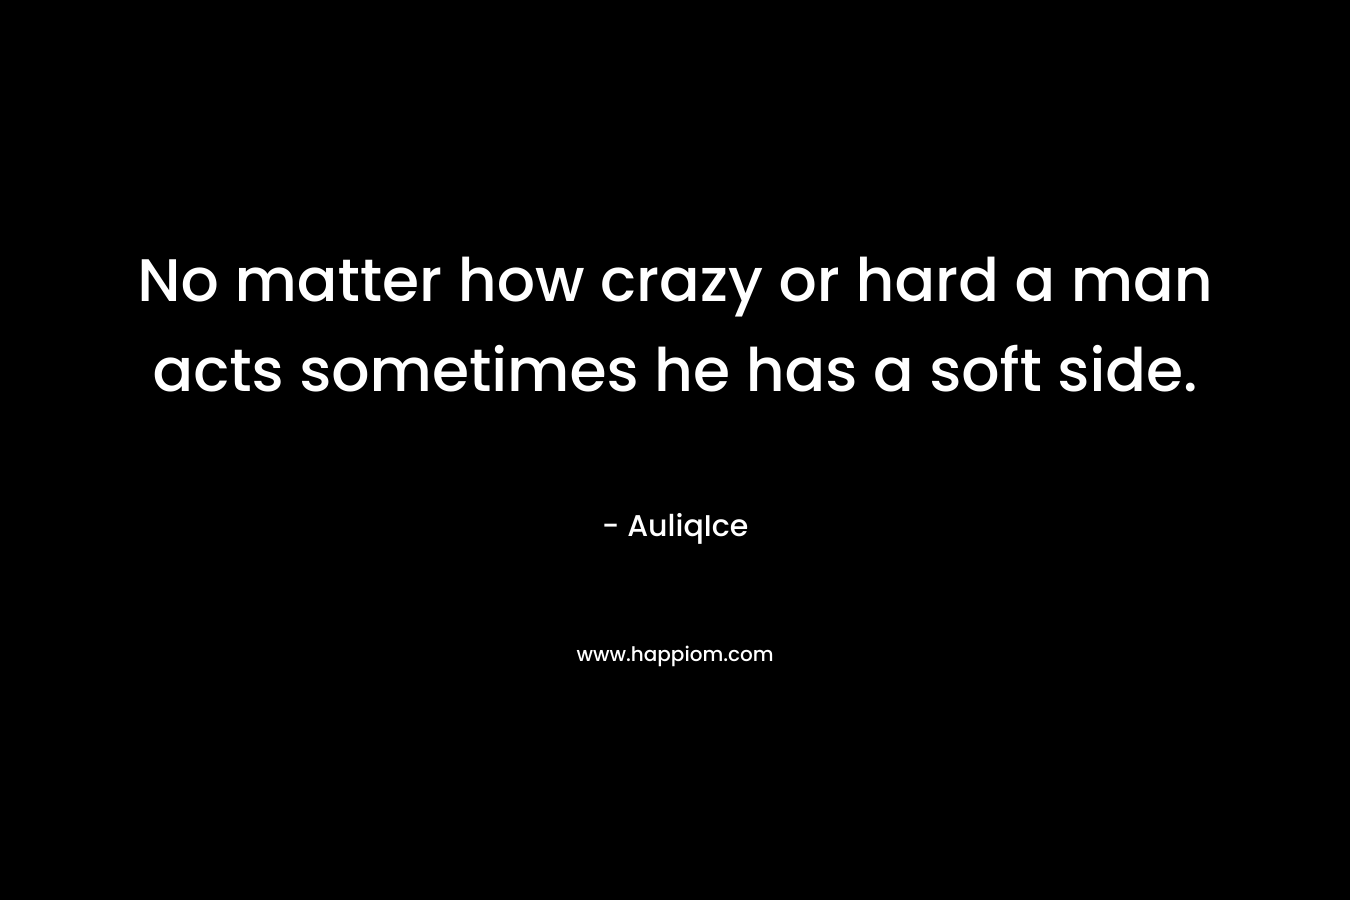 No matter how crazy or hard a man acts sometimes he has a soft side.